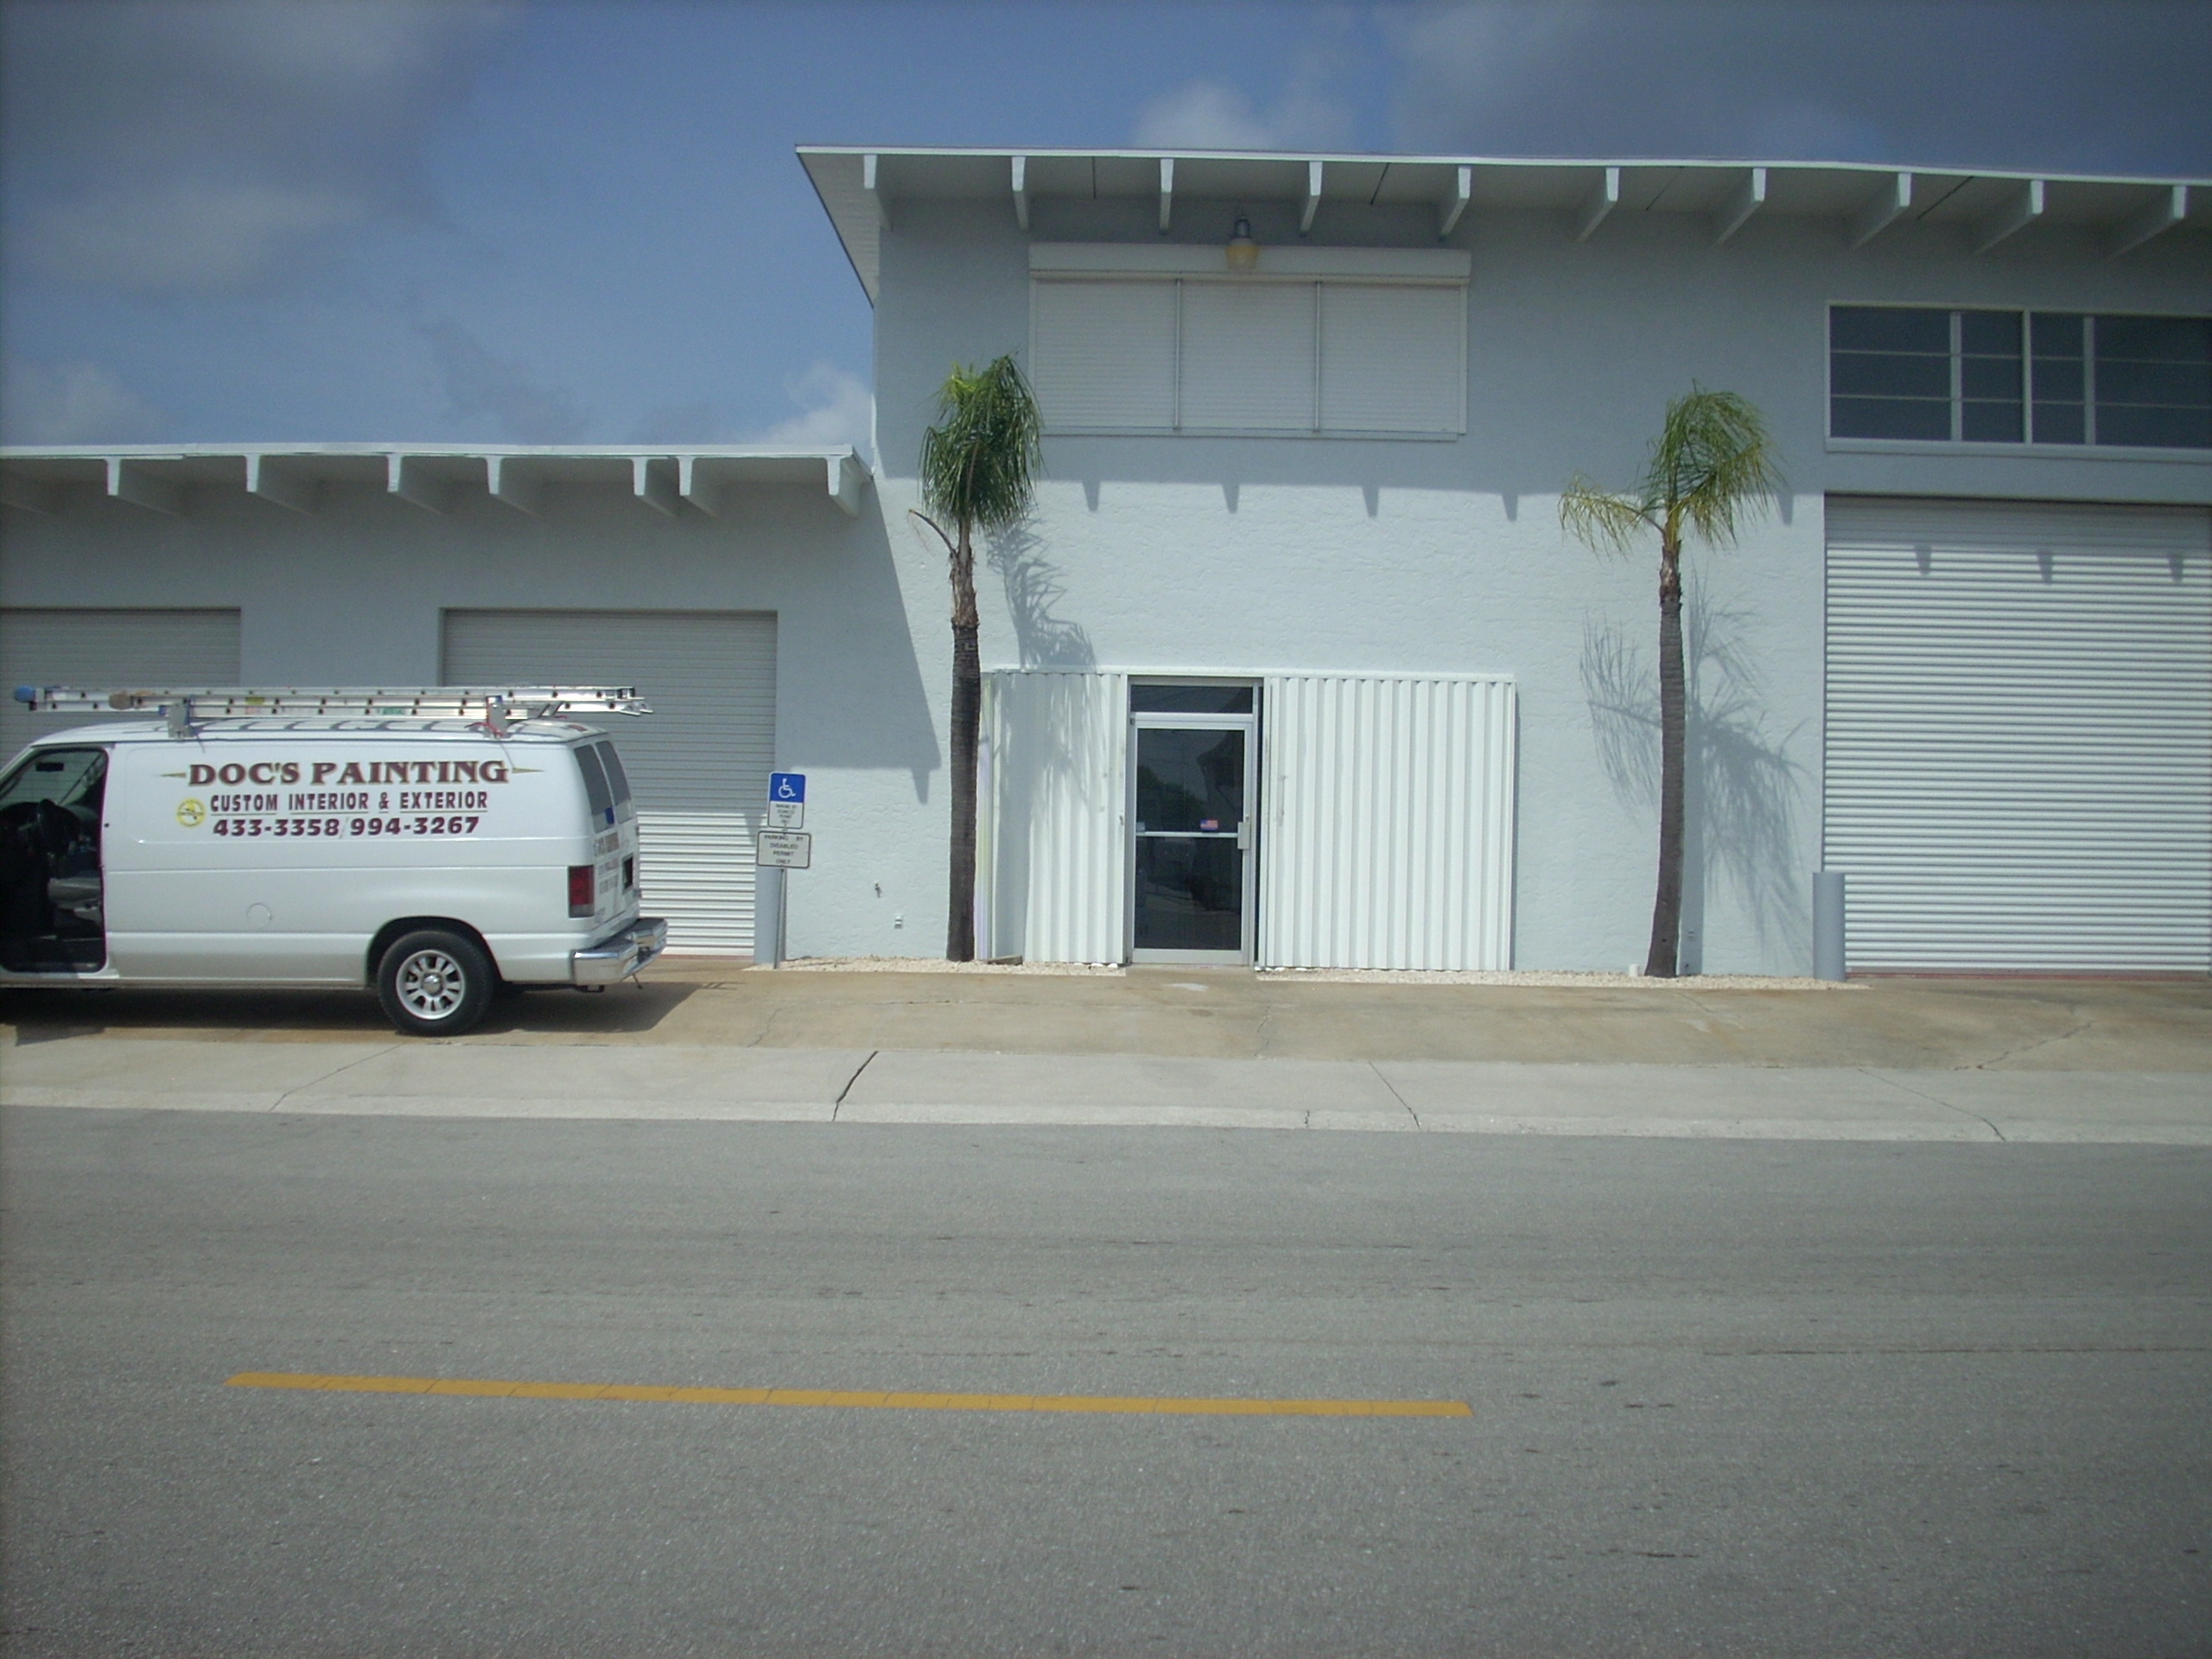 Exterior and Business Painter near Ft. Myers, FL